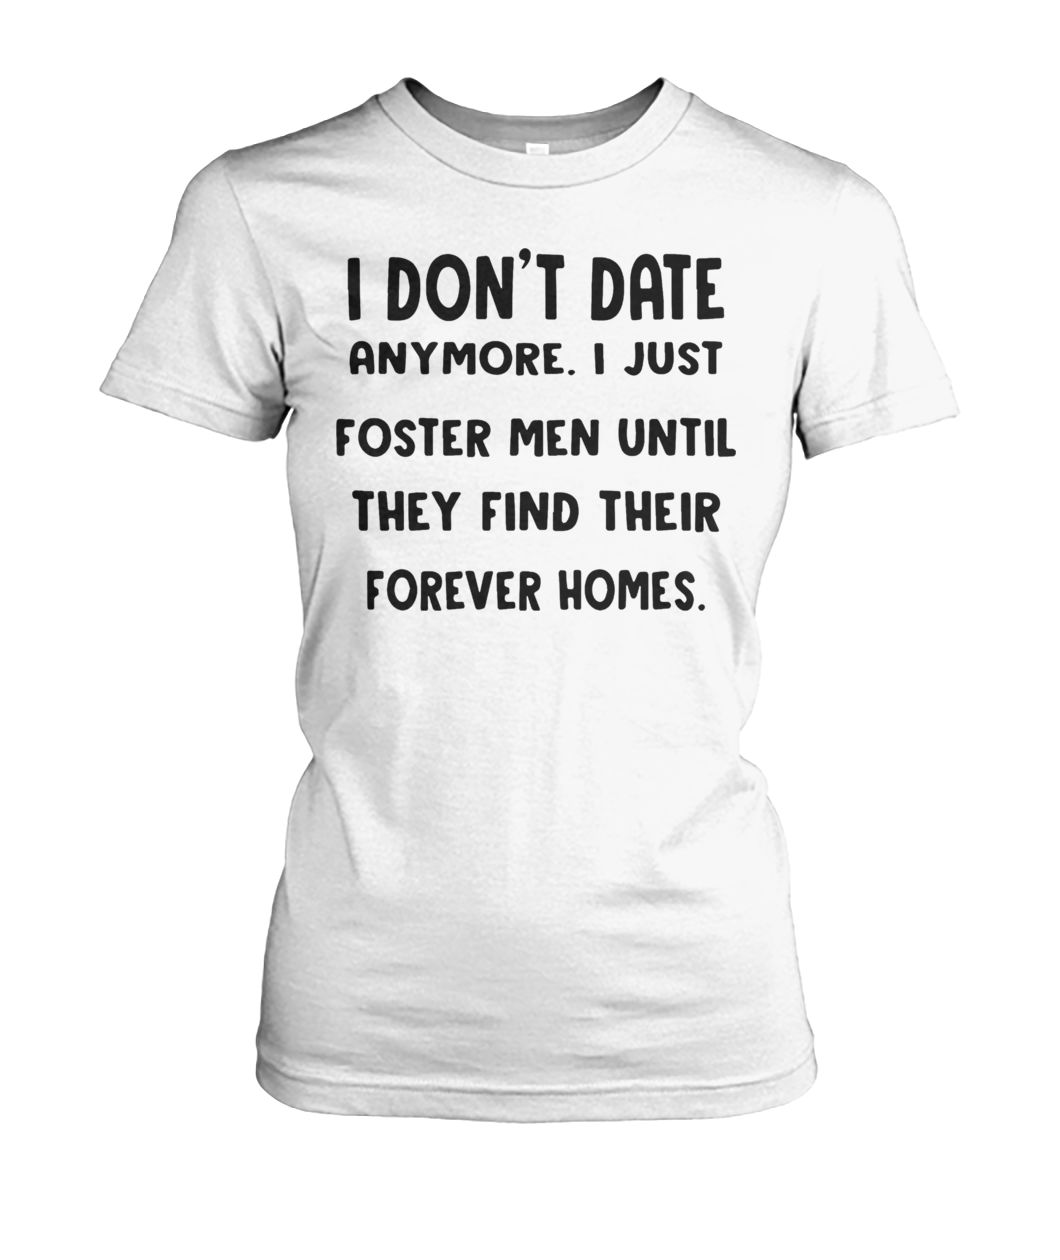 I don’t date anymore I just foster men until they find their forever homes women's crew tee